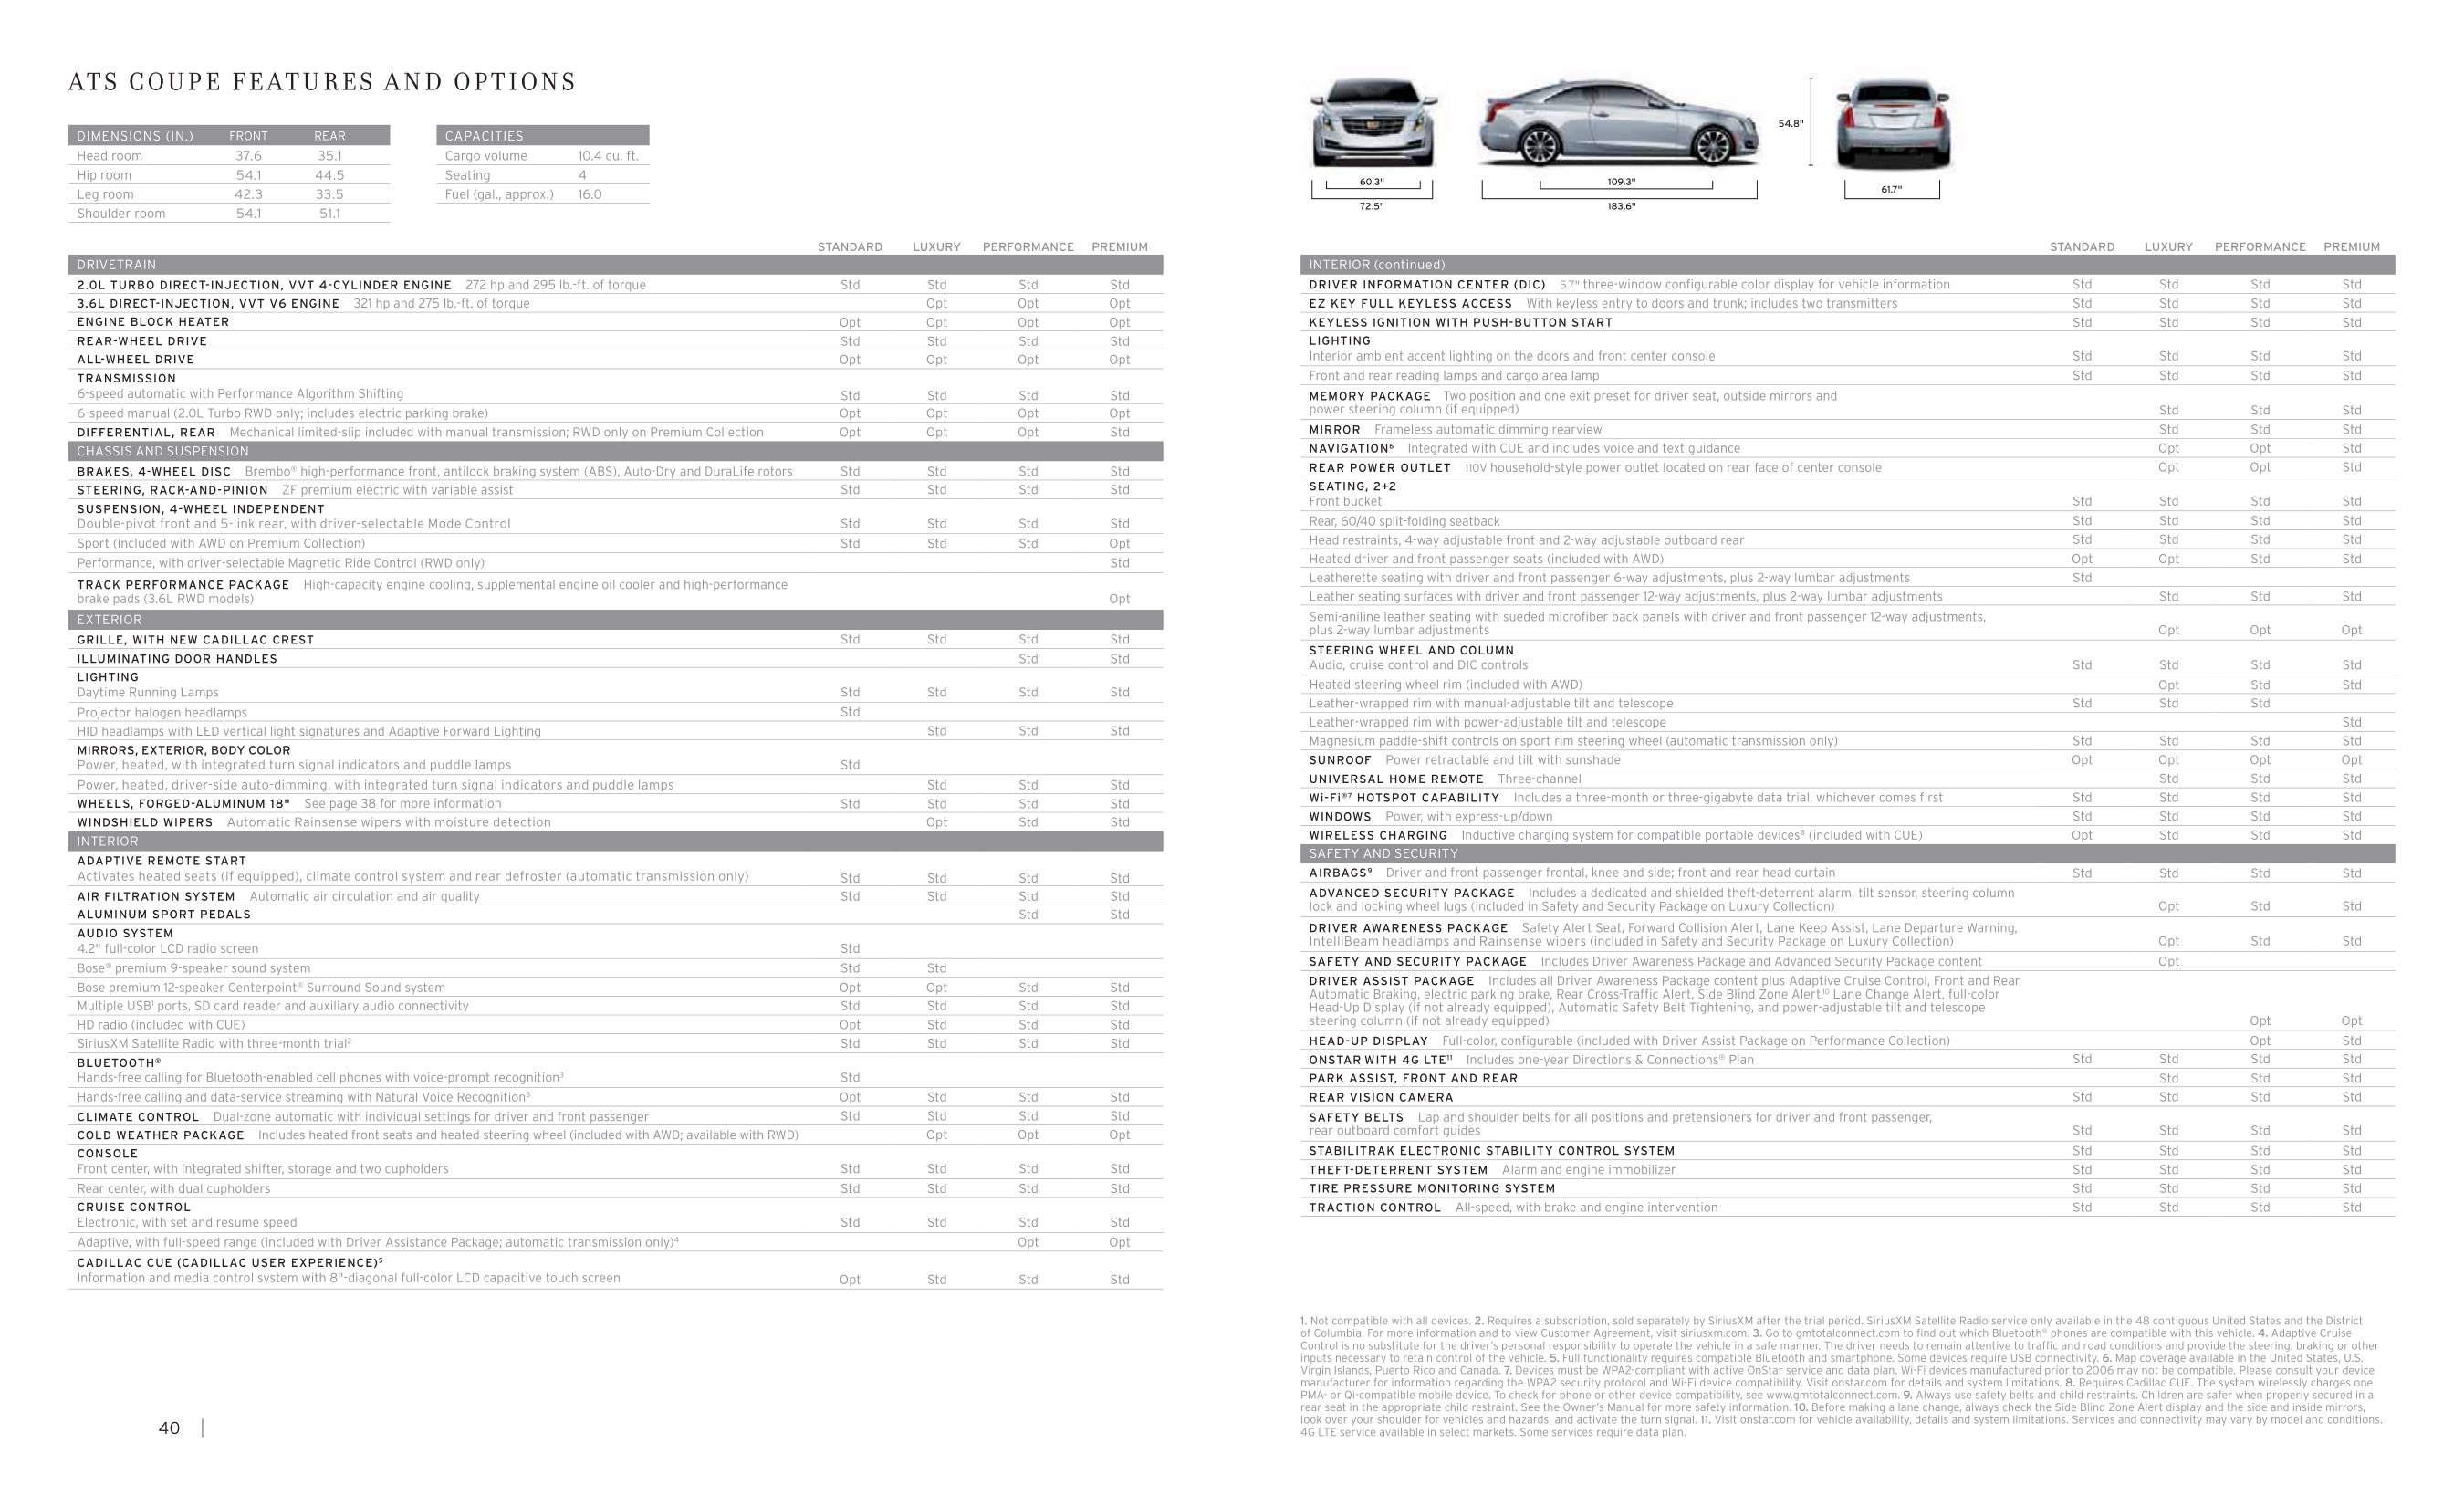 2015 Cadillac ATS Coupe Brochure Page 10